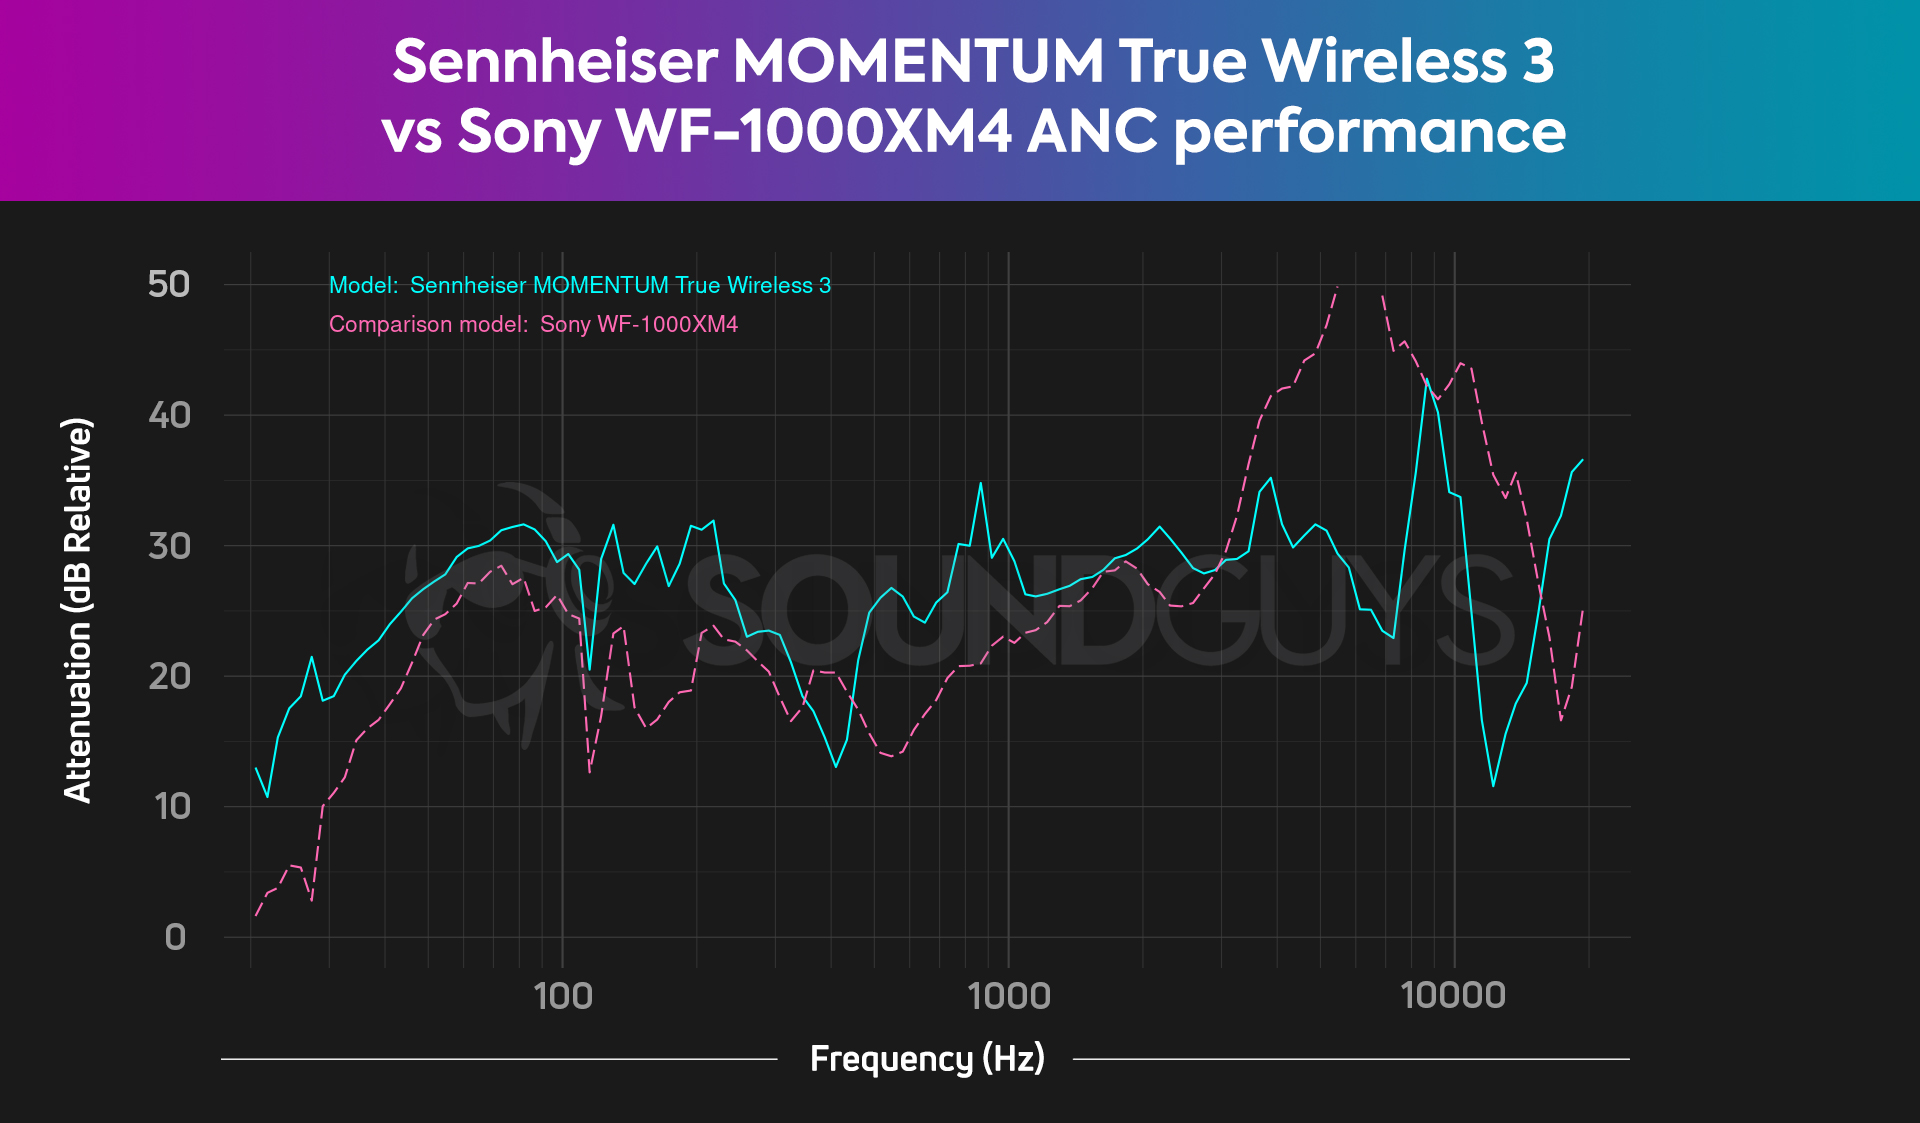 This chart depicts the combined active noise canceling and isolation performances of the Sennheiser MOMENTUM True Wireless 3 and the Sony WF-1000XM4.